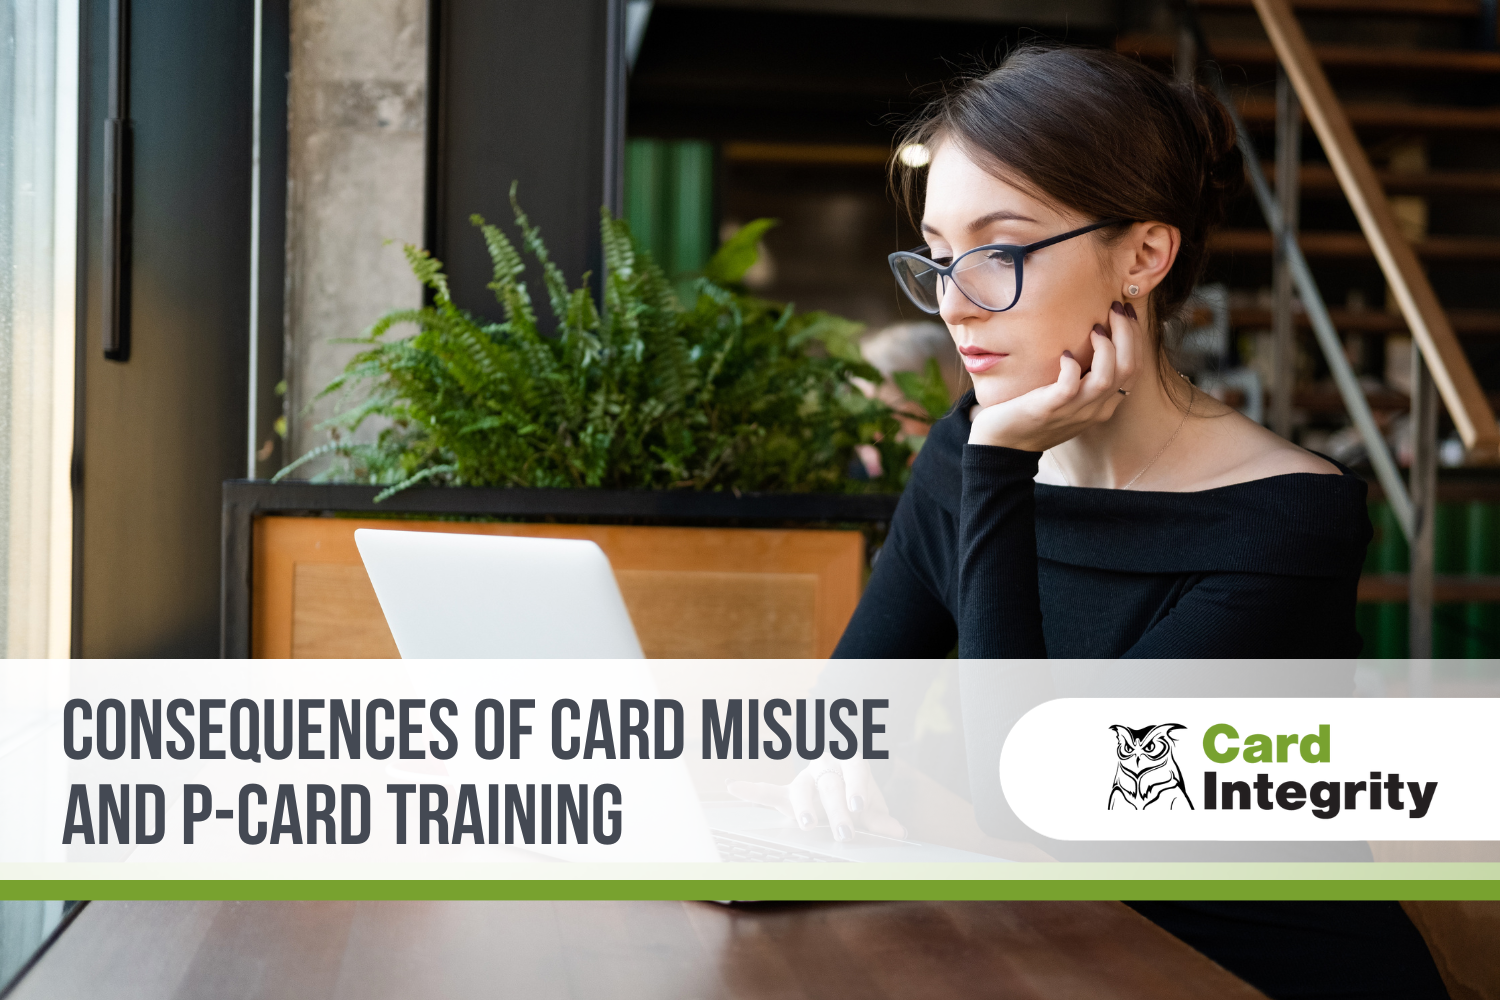 Consequences and P-Card Training